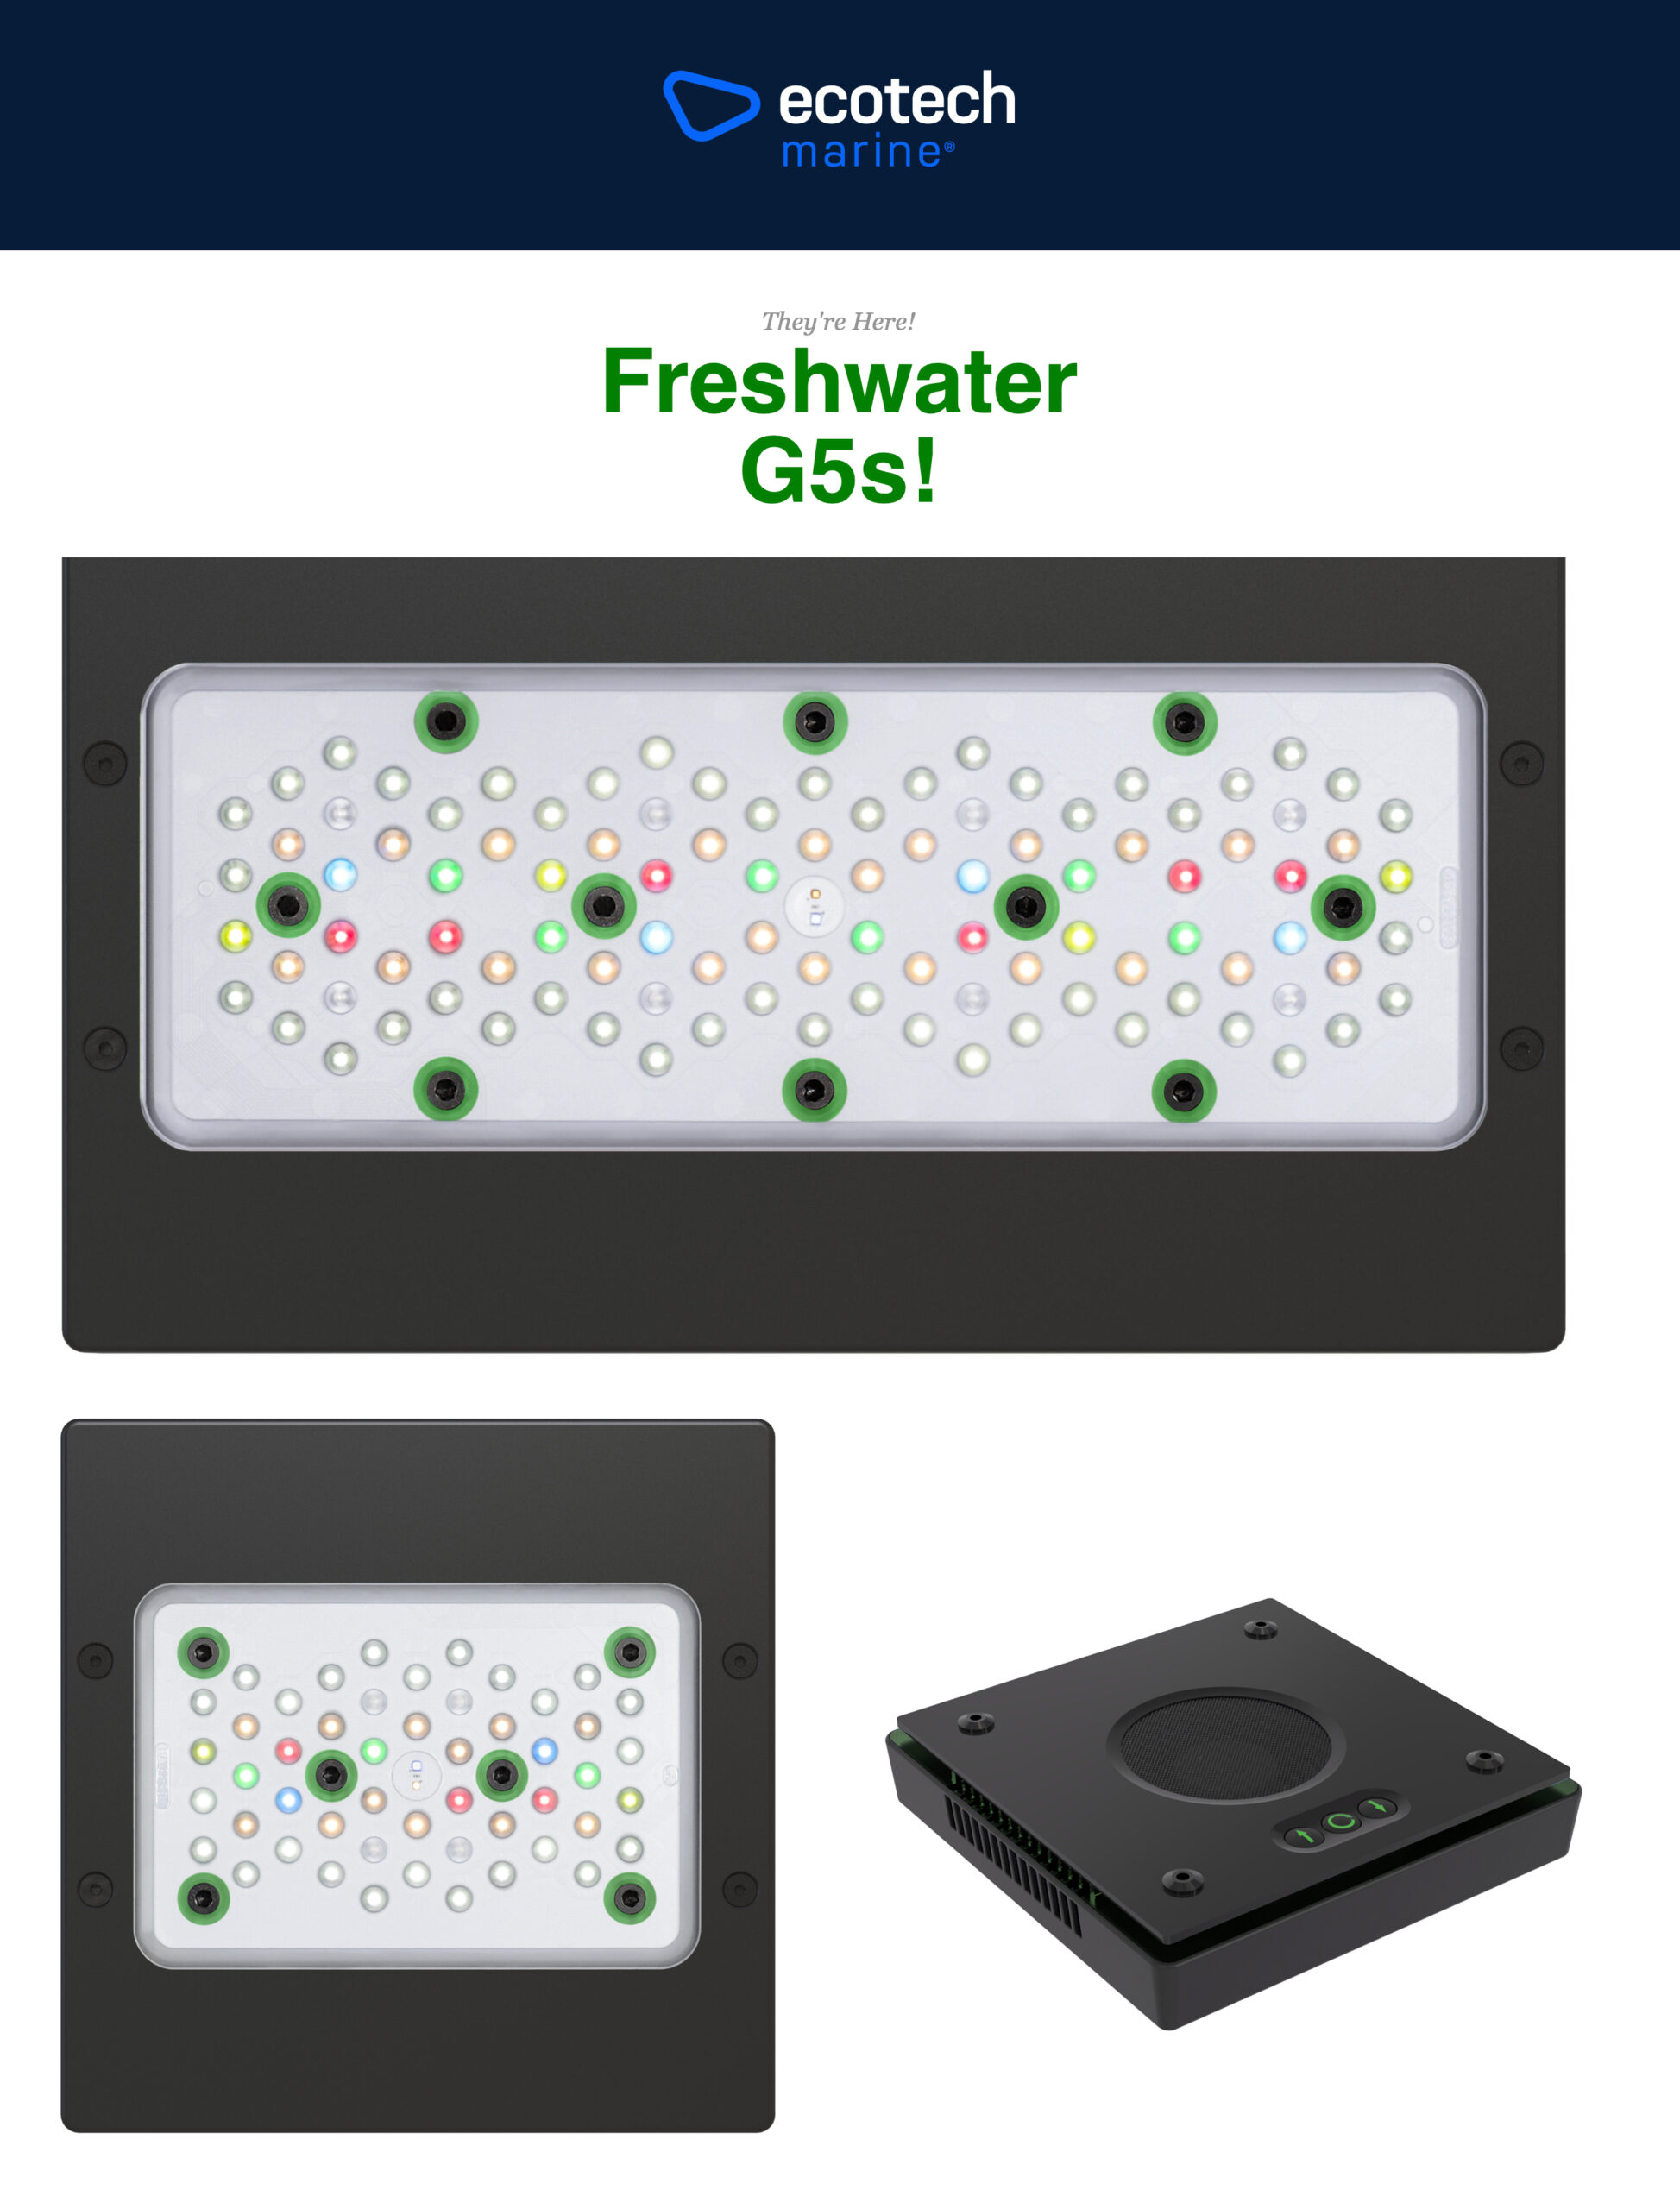 A Look at the Ecotech Marine G5 Freshwater LED Lights